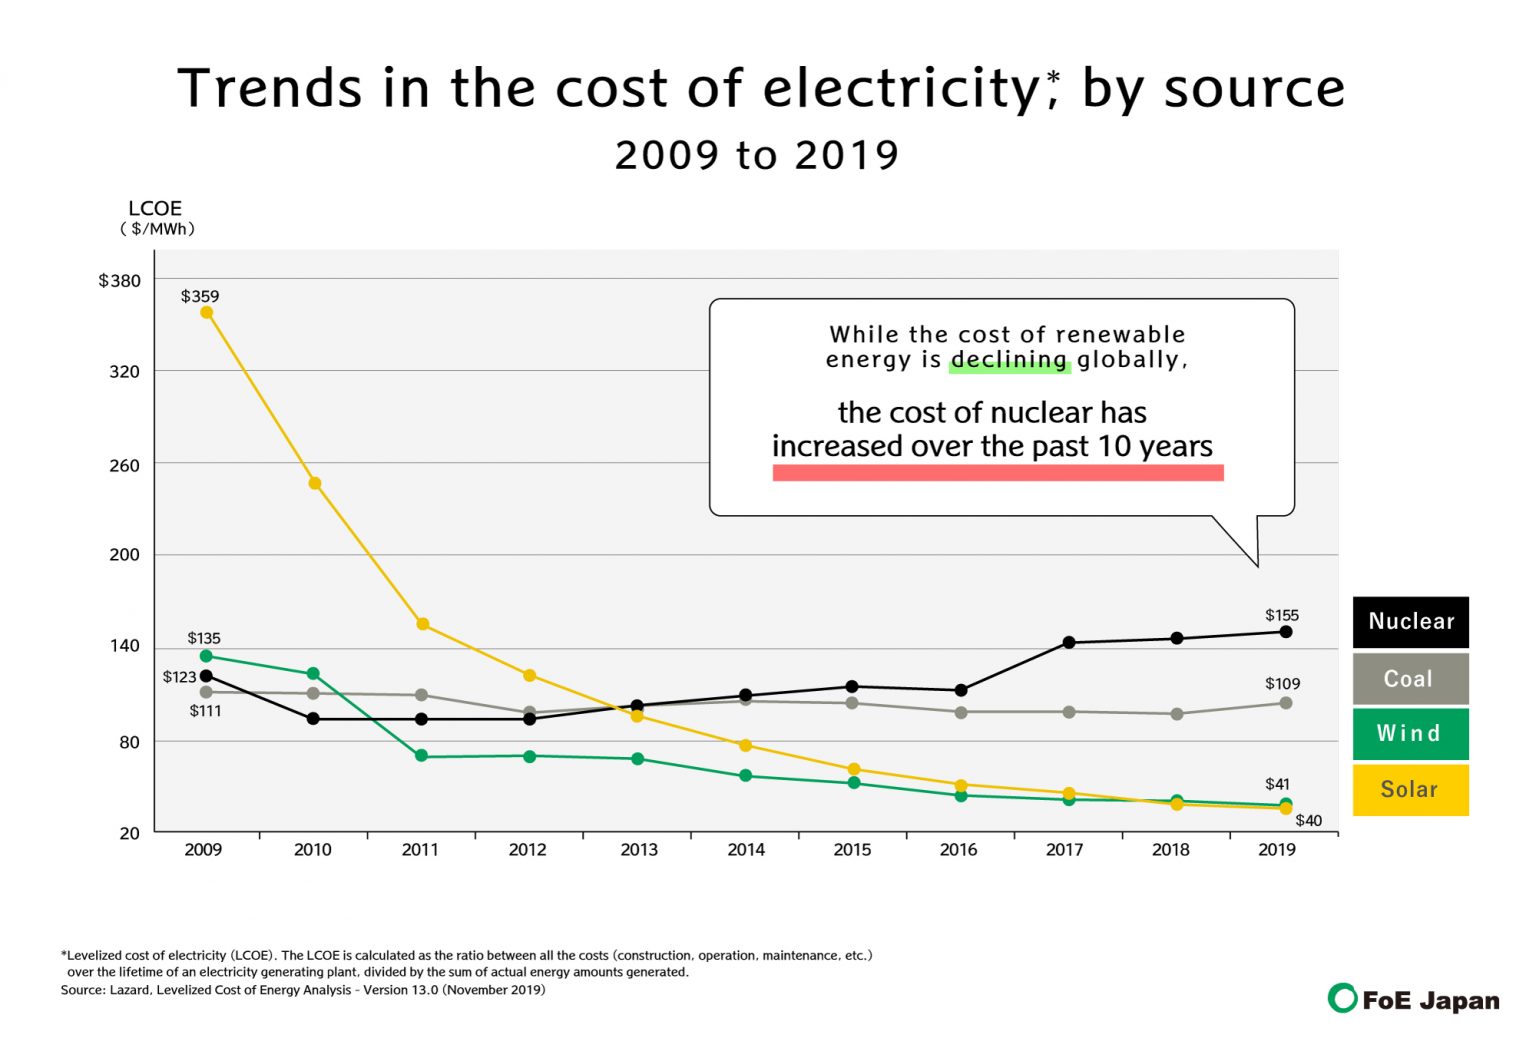 12 Global trends in the cost of electricity, by source (2009 to 2019